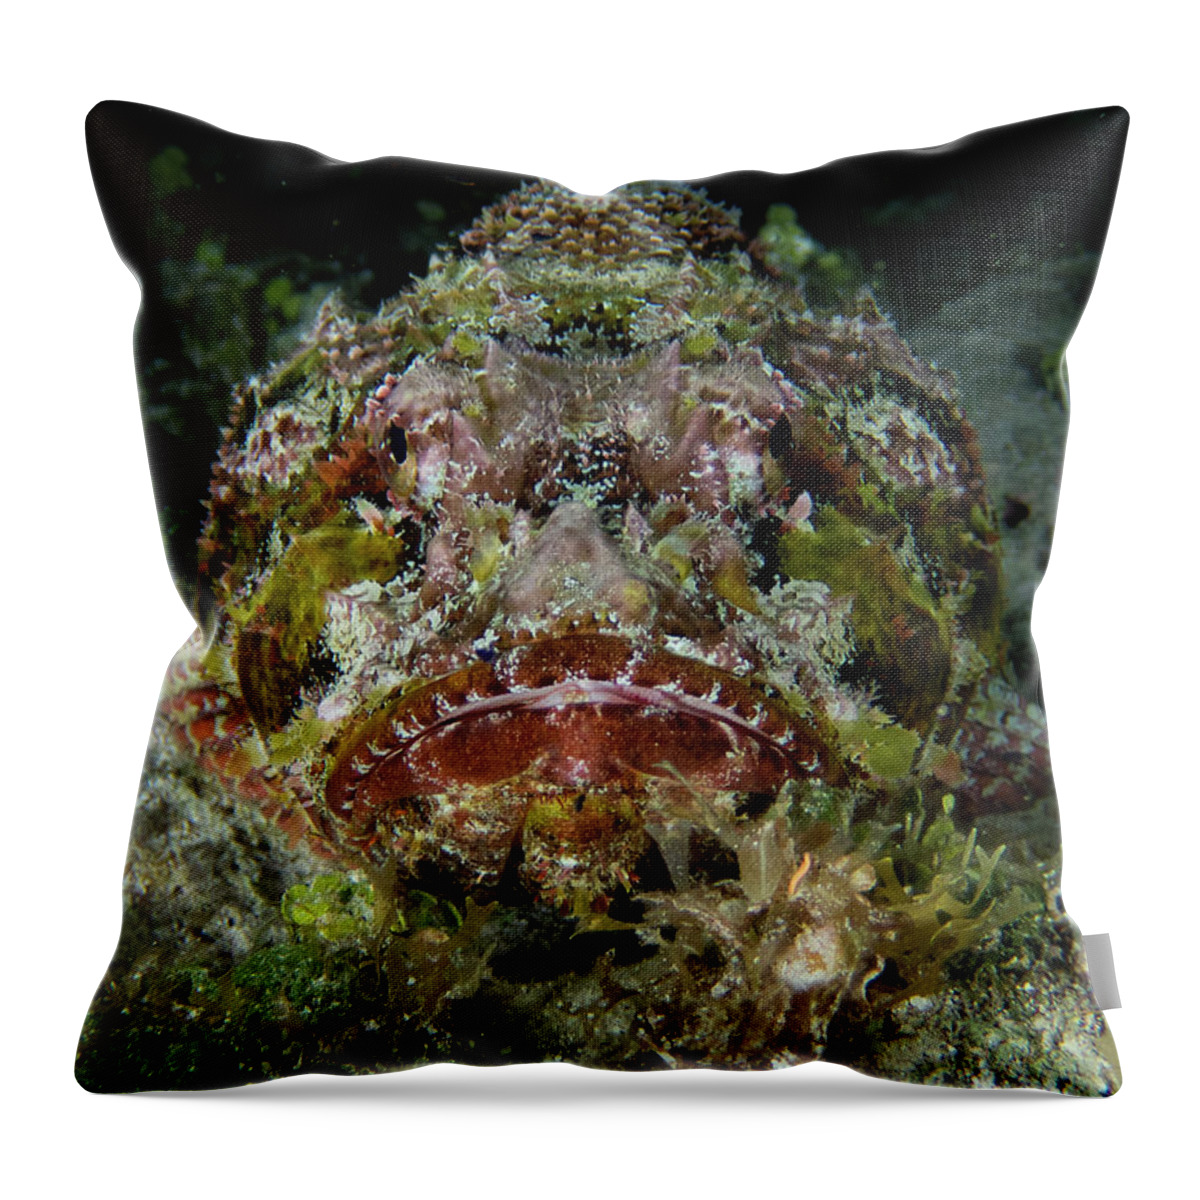 Scorpionfish Throw Pillow featuring the photograph Spotted Scorpionfish by Brian Weber